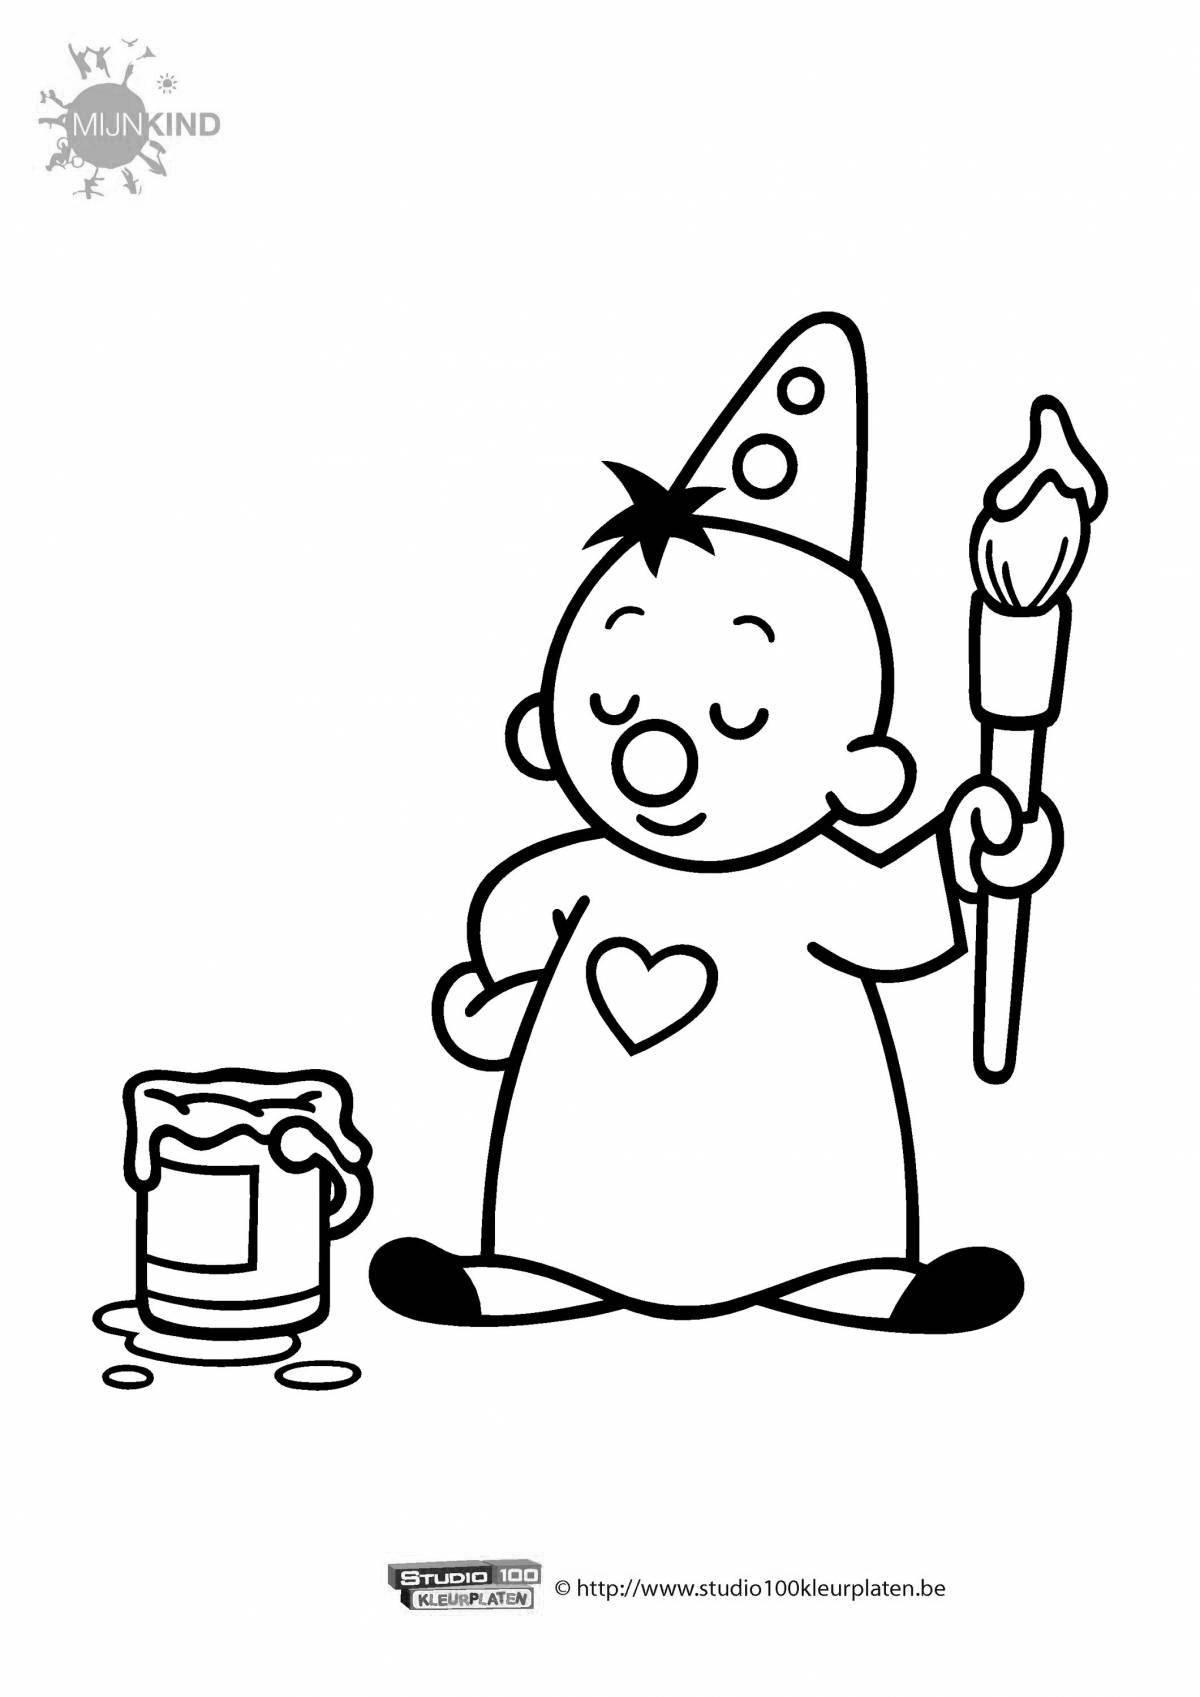 Adorable figurine coloring the coloring page